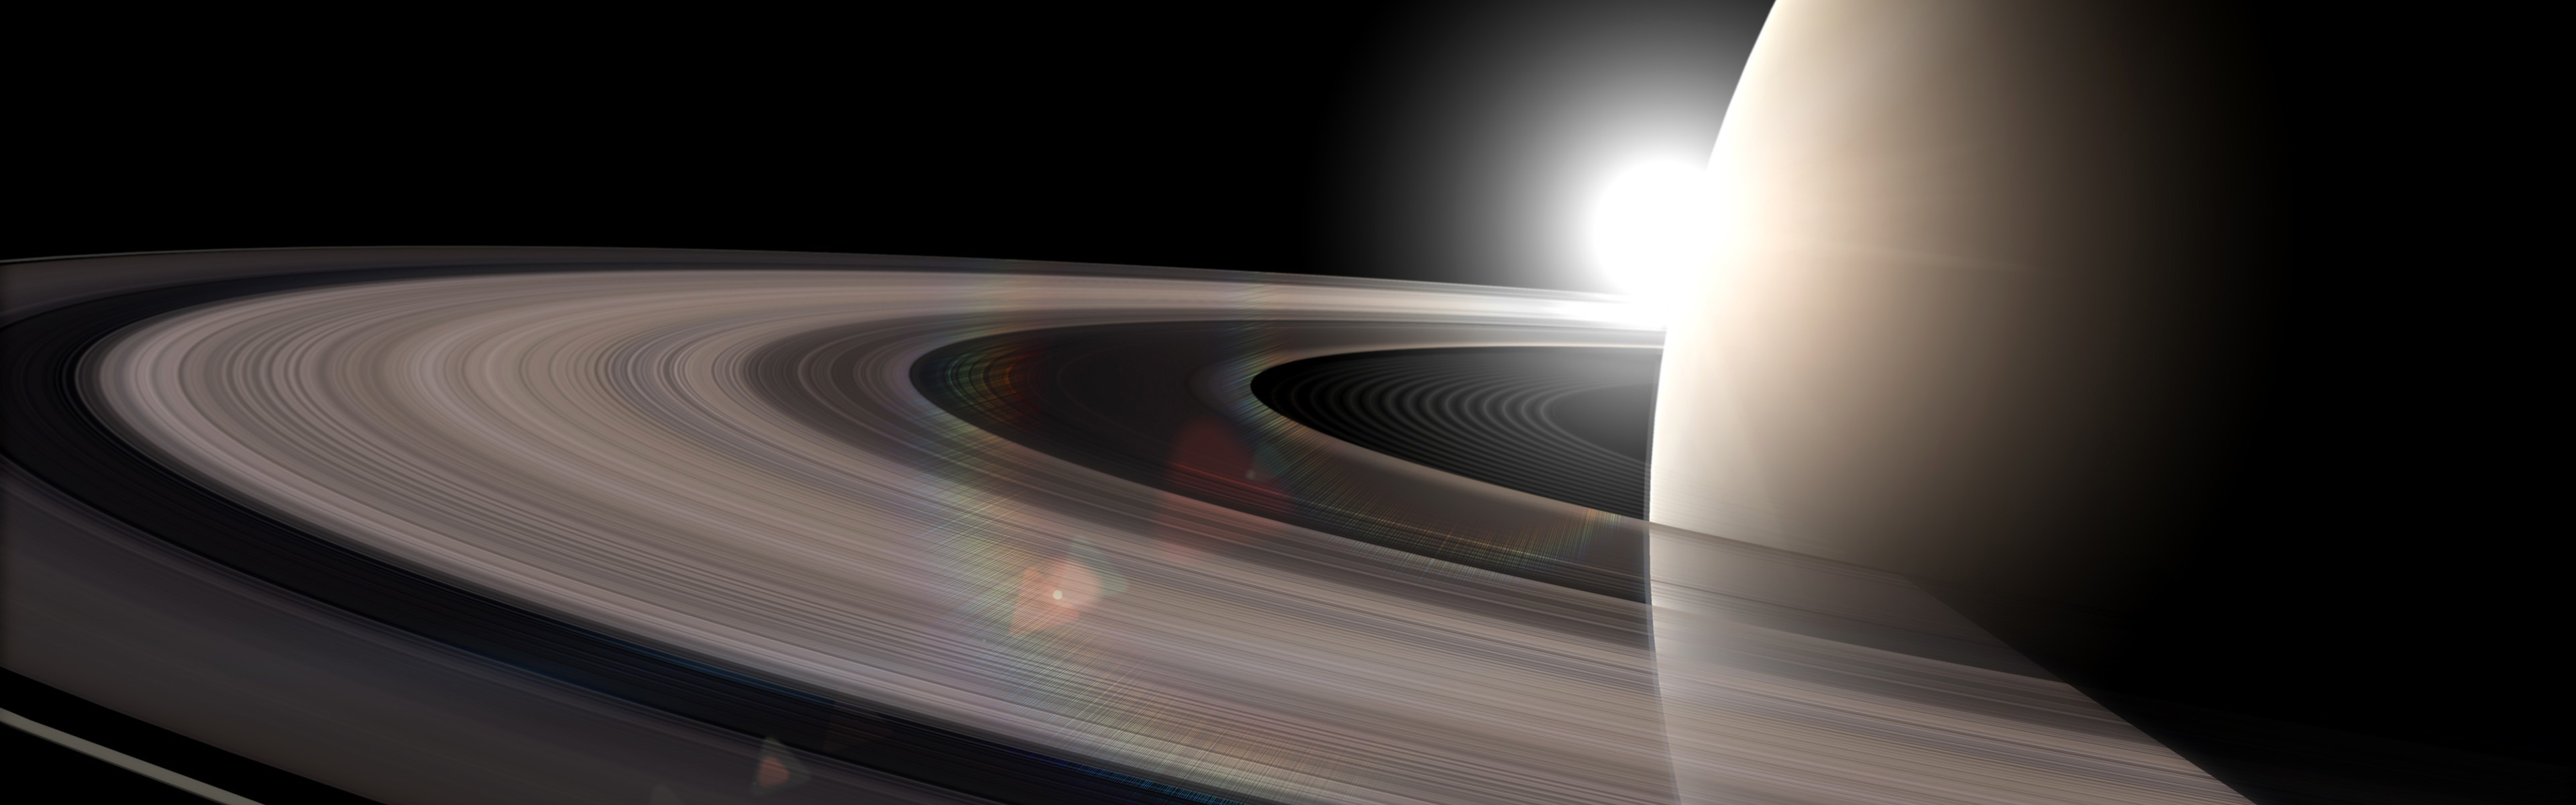 Saturn, Space, Planetary Rings, Planet, Solar System, Multiple Display Wallpaper